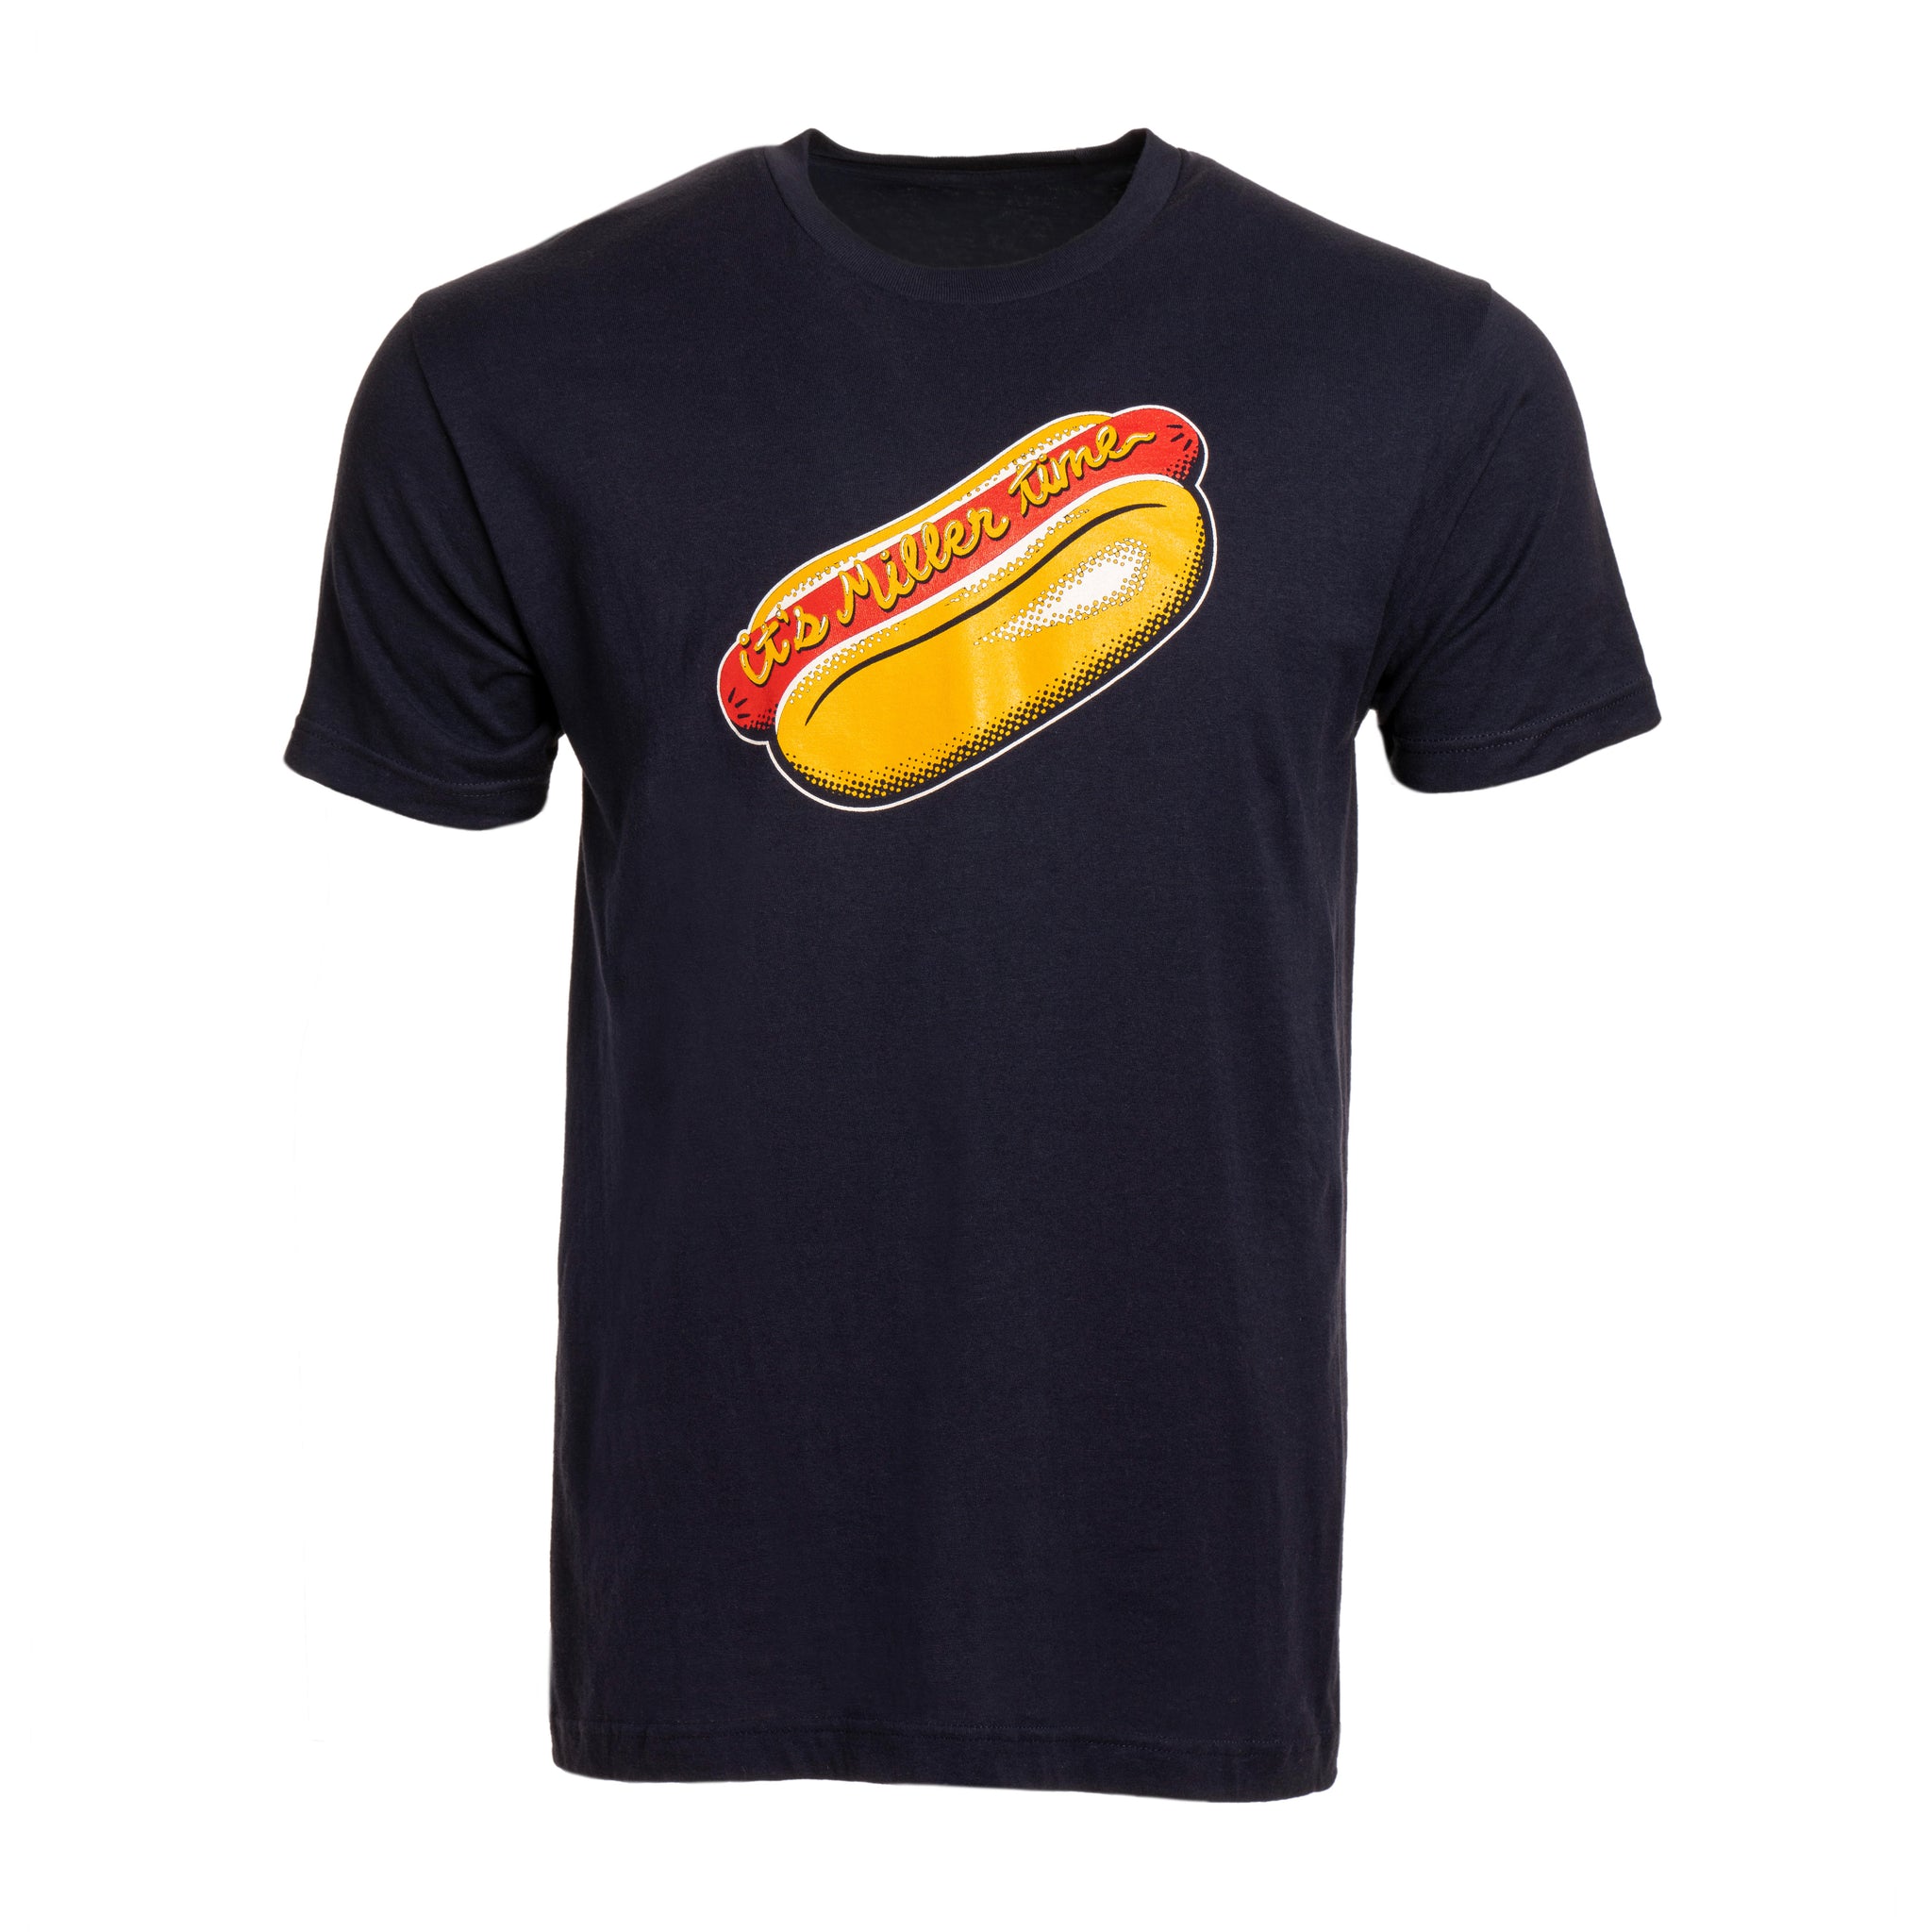 ITS MILLER TIME HOT DOG TEE